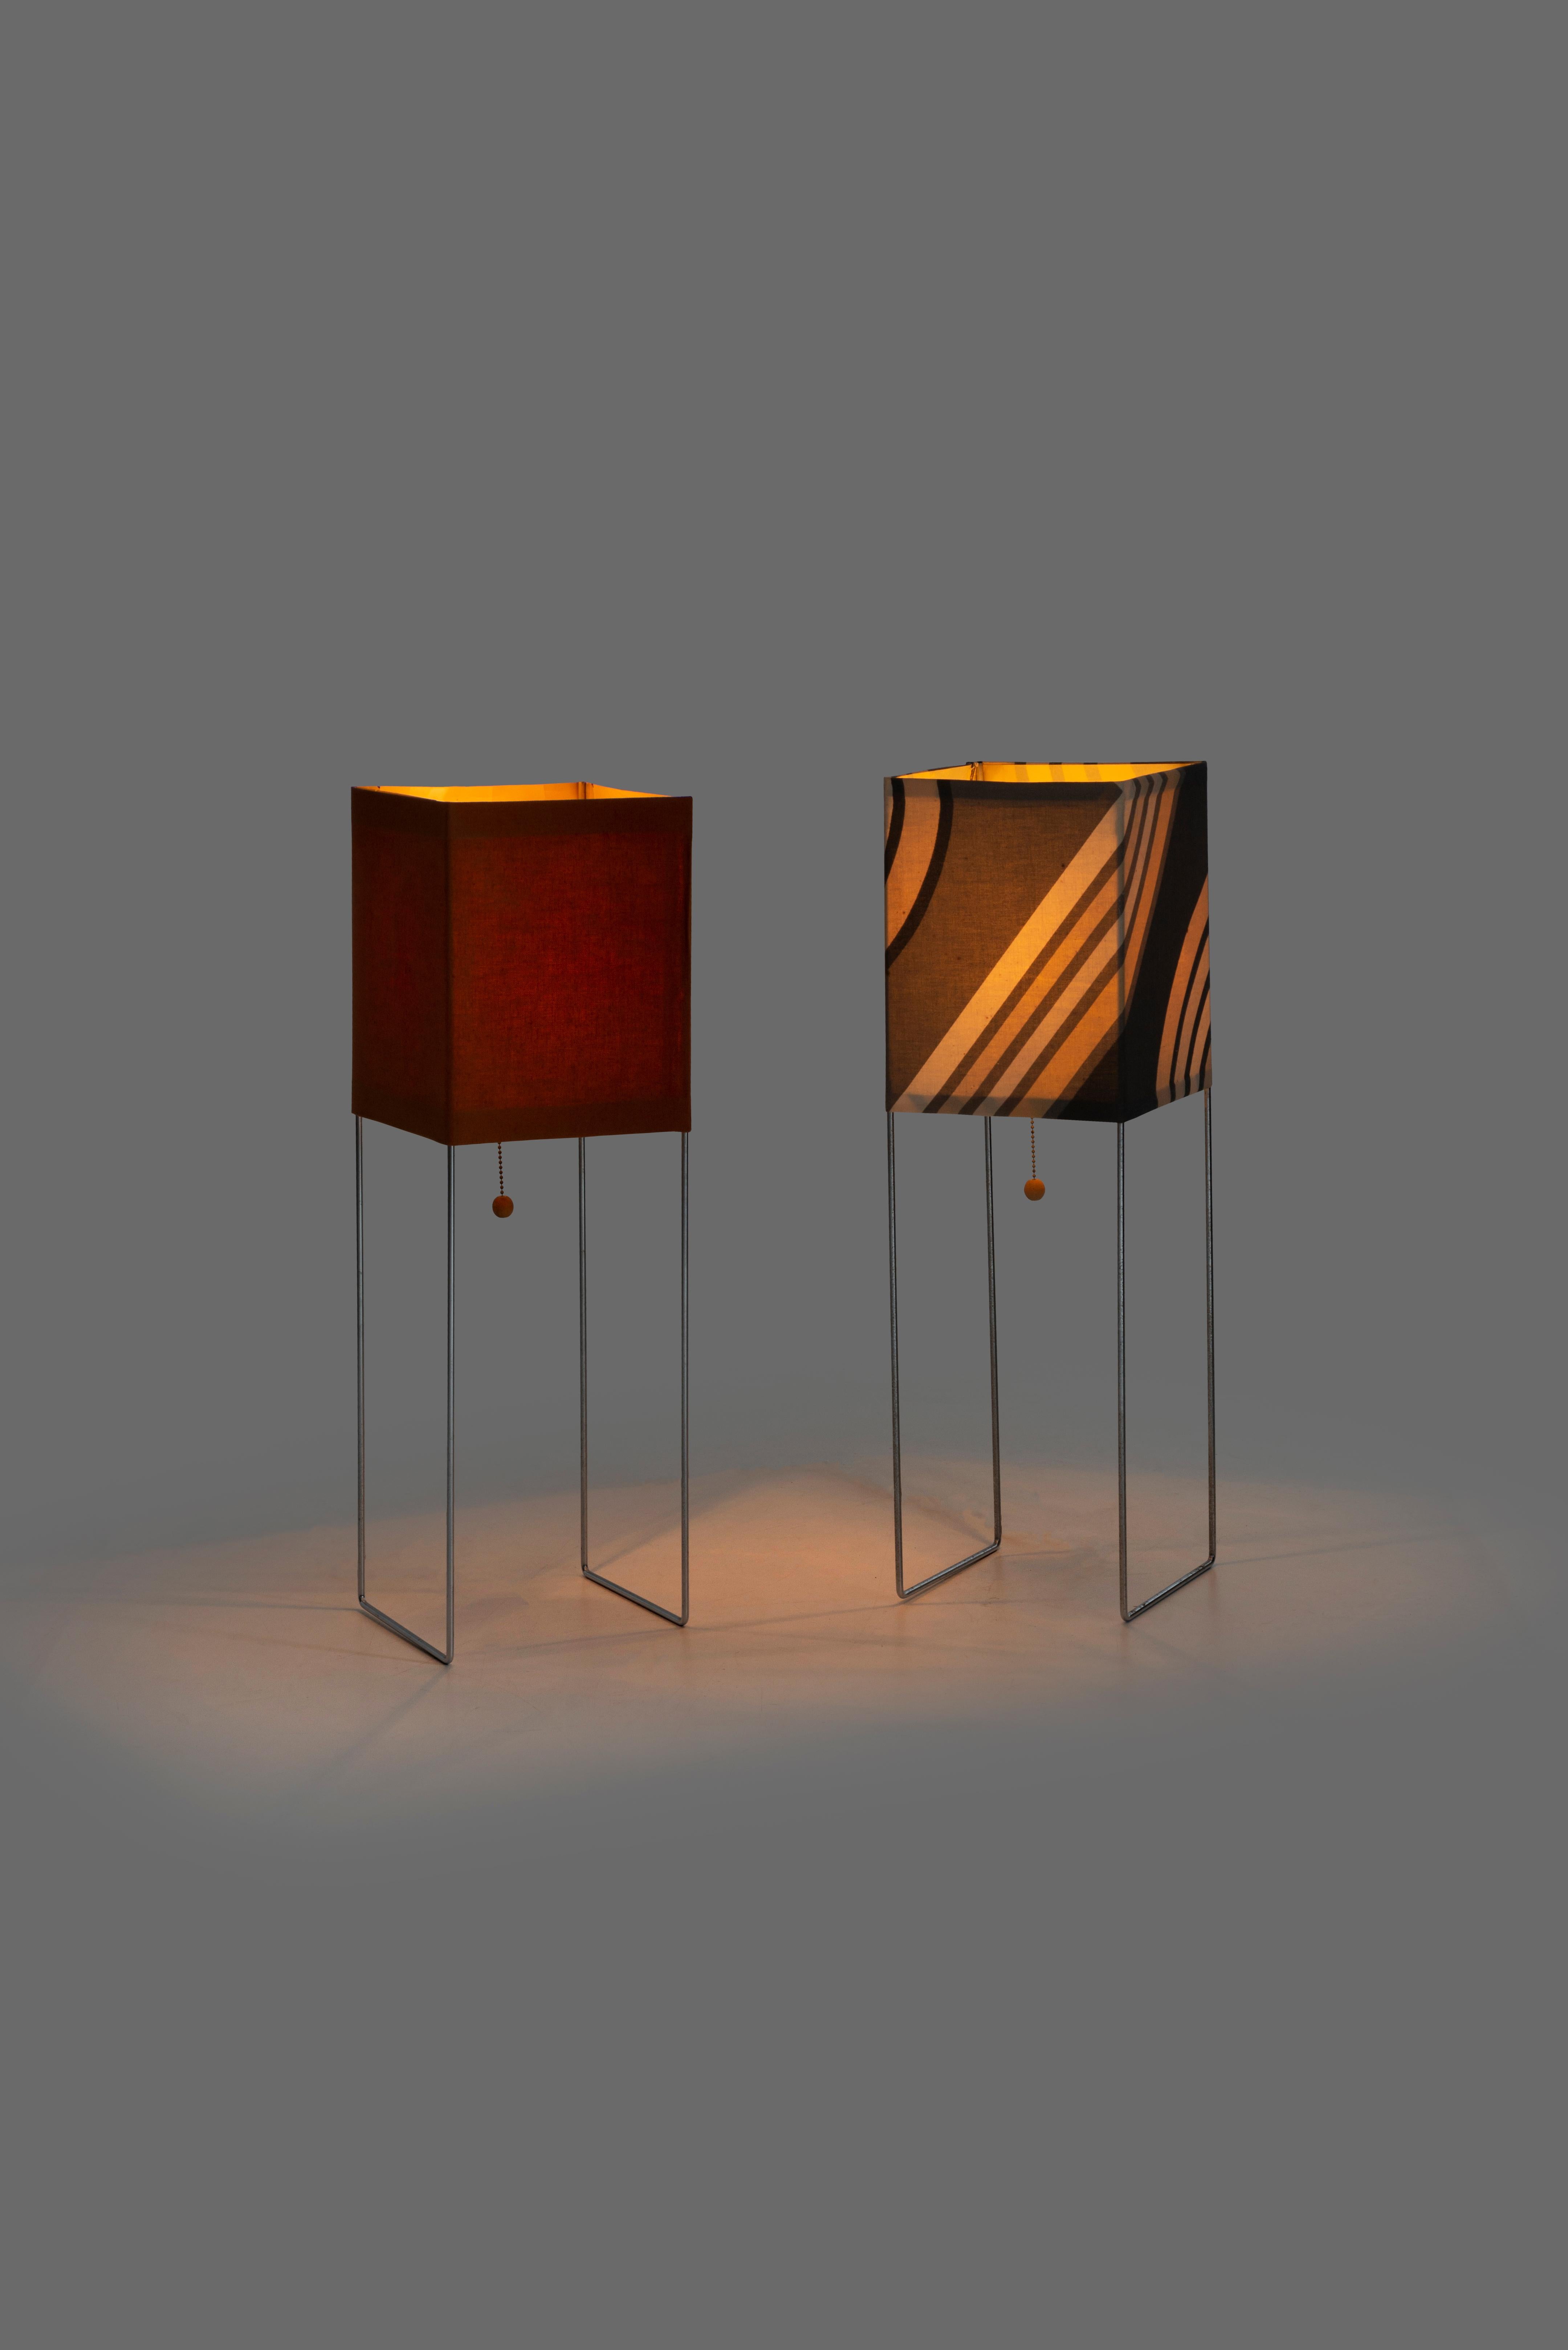 Pair of Gregory van Pelt wireworks lamps, chrome-plated steel, with original canvas shades.